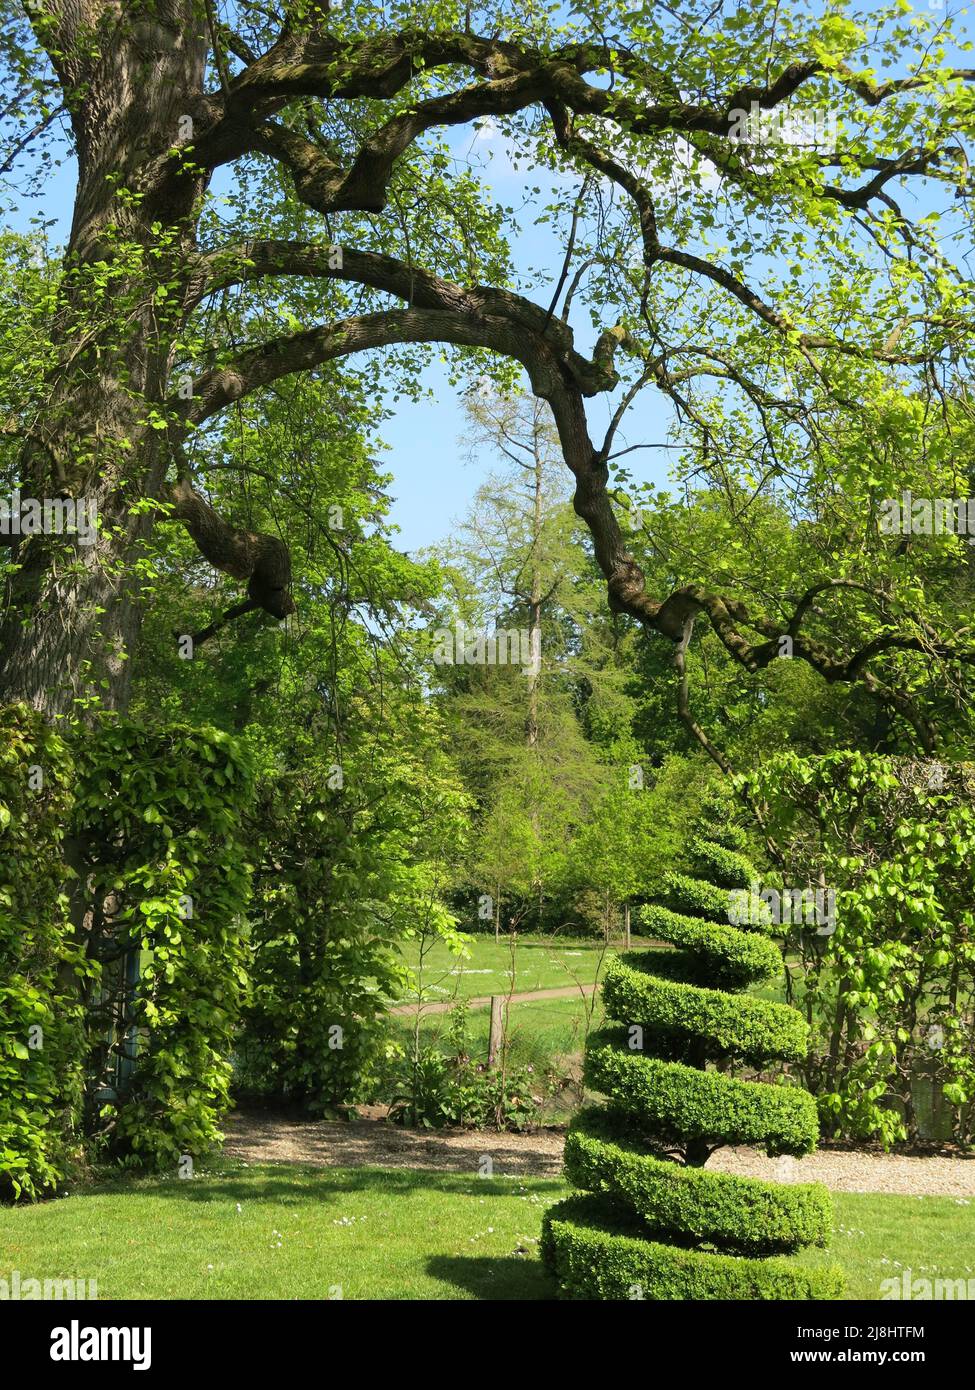 Dutch gardens to visit: topiary, trees, paths and parkland - features of the landscaped garden at De Wiersse near Vorden in the Netherlands. Stock Photo